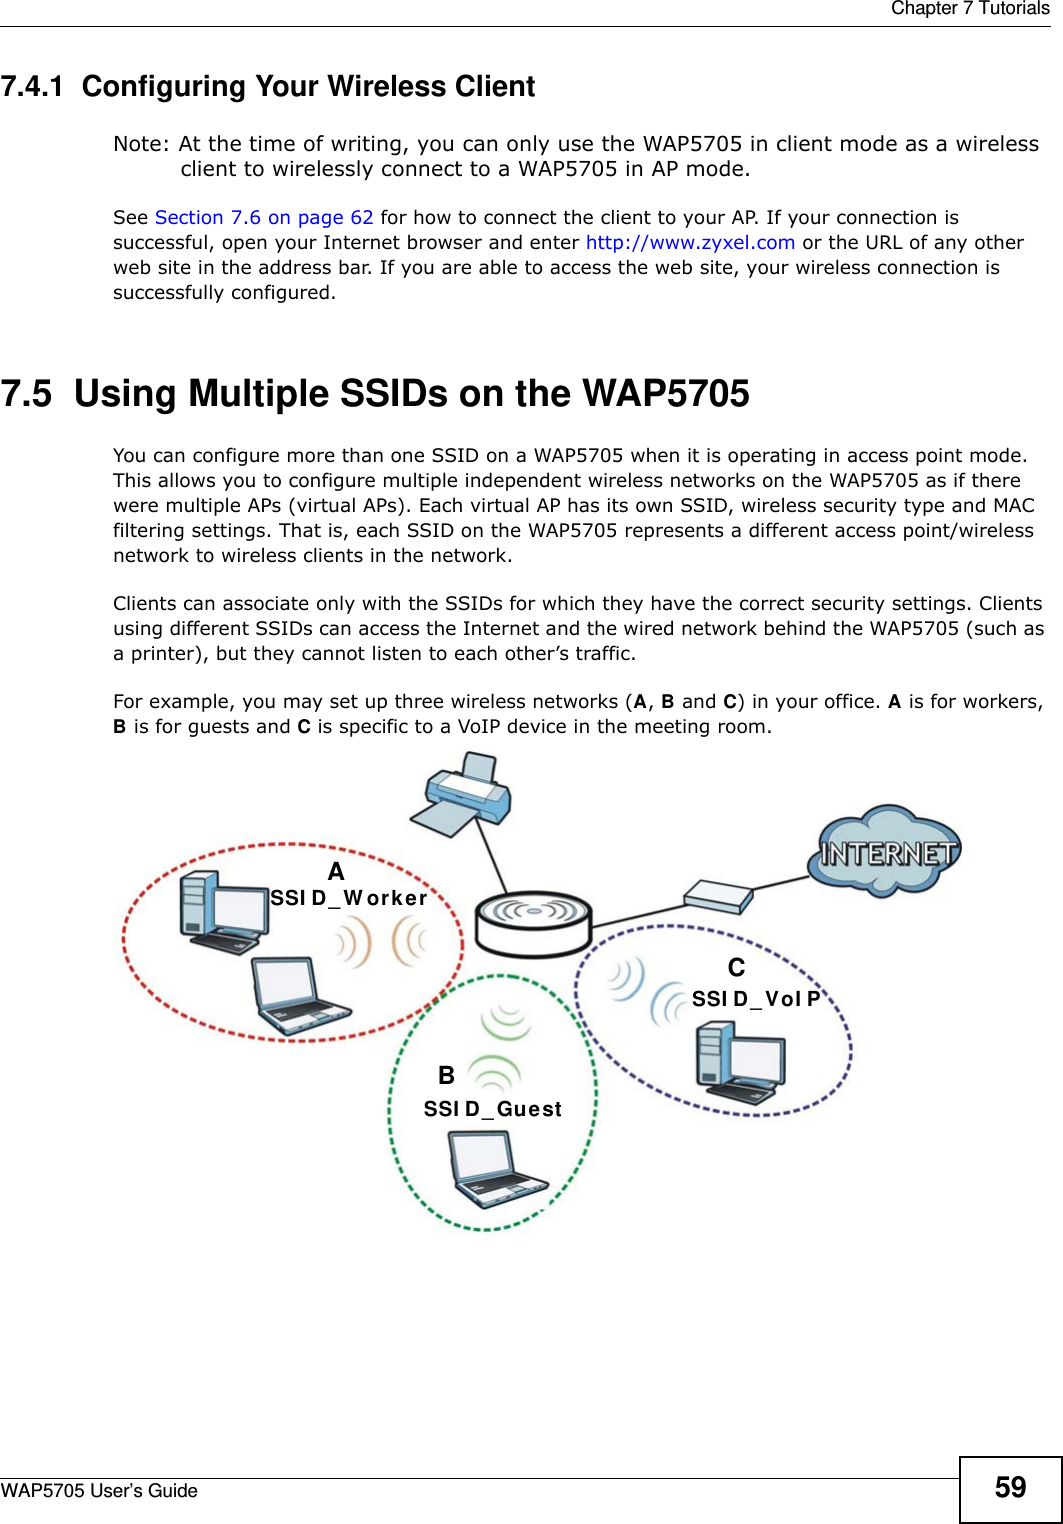  Chapter 7 TutorialsWAP5705 User’s Guide 597.4.1  Configuring Your Wireless ClientNote: At the time of writing, you can only use the WAP5705 in client mode as a wireless client to wirelessly connect to a WAP5705 in AP mode.See Section 7.6 on page 62 for how to connect the client to your AP. If your connection is successful, open your Internet browser and enter http://www.zyxel.com or the URL of any other web site in the address bar. If you are able to access the web site, your wireless connection is successfully configured.7.5  Using Multiple SSIDs on the WAP5705You can configure more than one SSID on a WAP5705 when it is operating in access point mode. This allows you to configure multiple independent wireless networks on the WAP5705 as if there were multiple APs (virtual APs). Each virtual AP has its own SSID, wireless security type and MAC filtering settings. That is, each SSID on the WAP5705 represents a different access point/wireless network to wireless clients in the network. Clients can associate only with the SSIDs for which they have the correct security settings. Clients using different SSIDs can access the Internet and the wired network behind the WAP5705 (such as a printer), but they cannot listen to each other’s traffic.For example, you may set up three wireless networks (A, B and C) in your office. A is for workers, B is for guests and C is specific to a VoIP device in the meeting room.  ABCSSI D_ Gue stSSI D _ W orkerSSI D_ VoI P